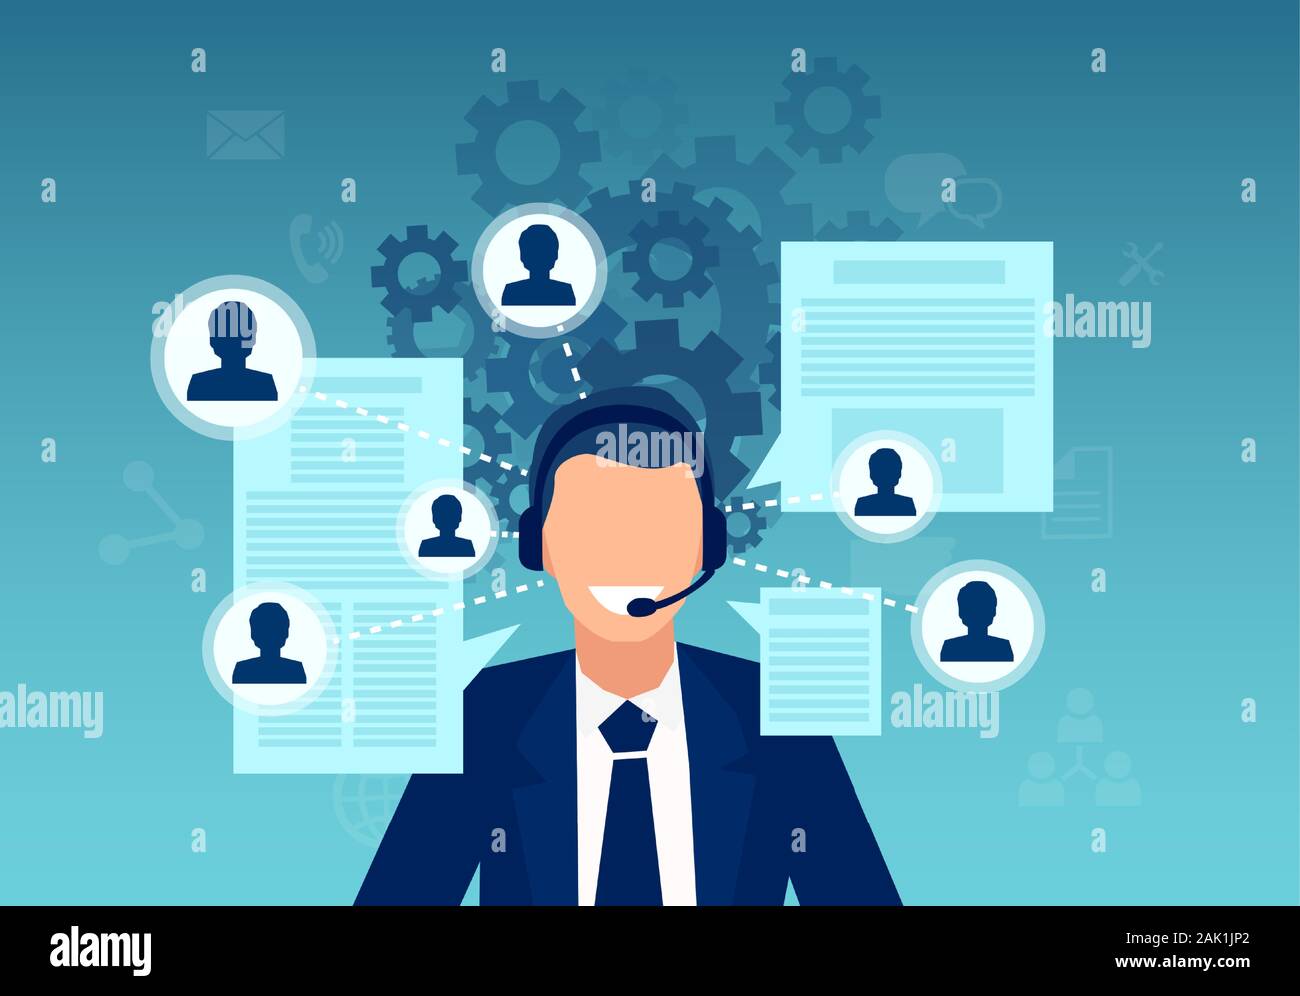 Vector of a customer service represenative with headset assisting clients Stock Vector